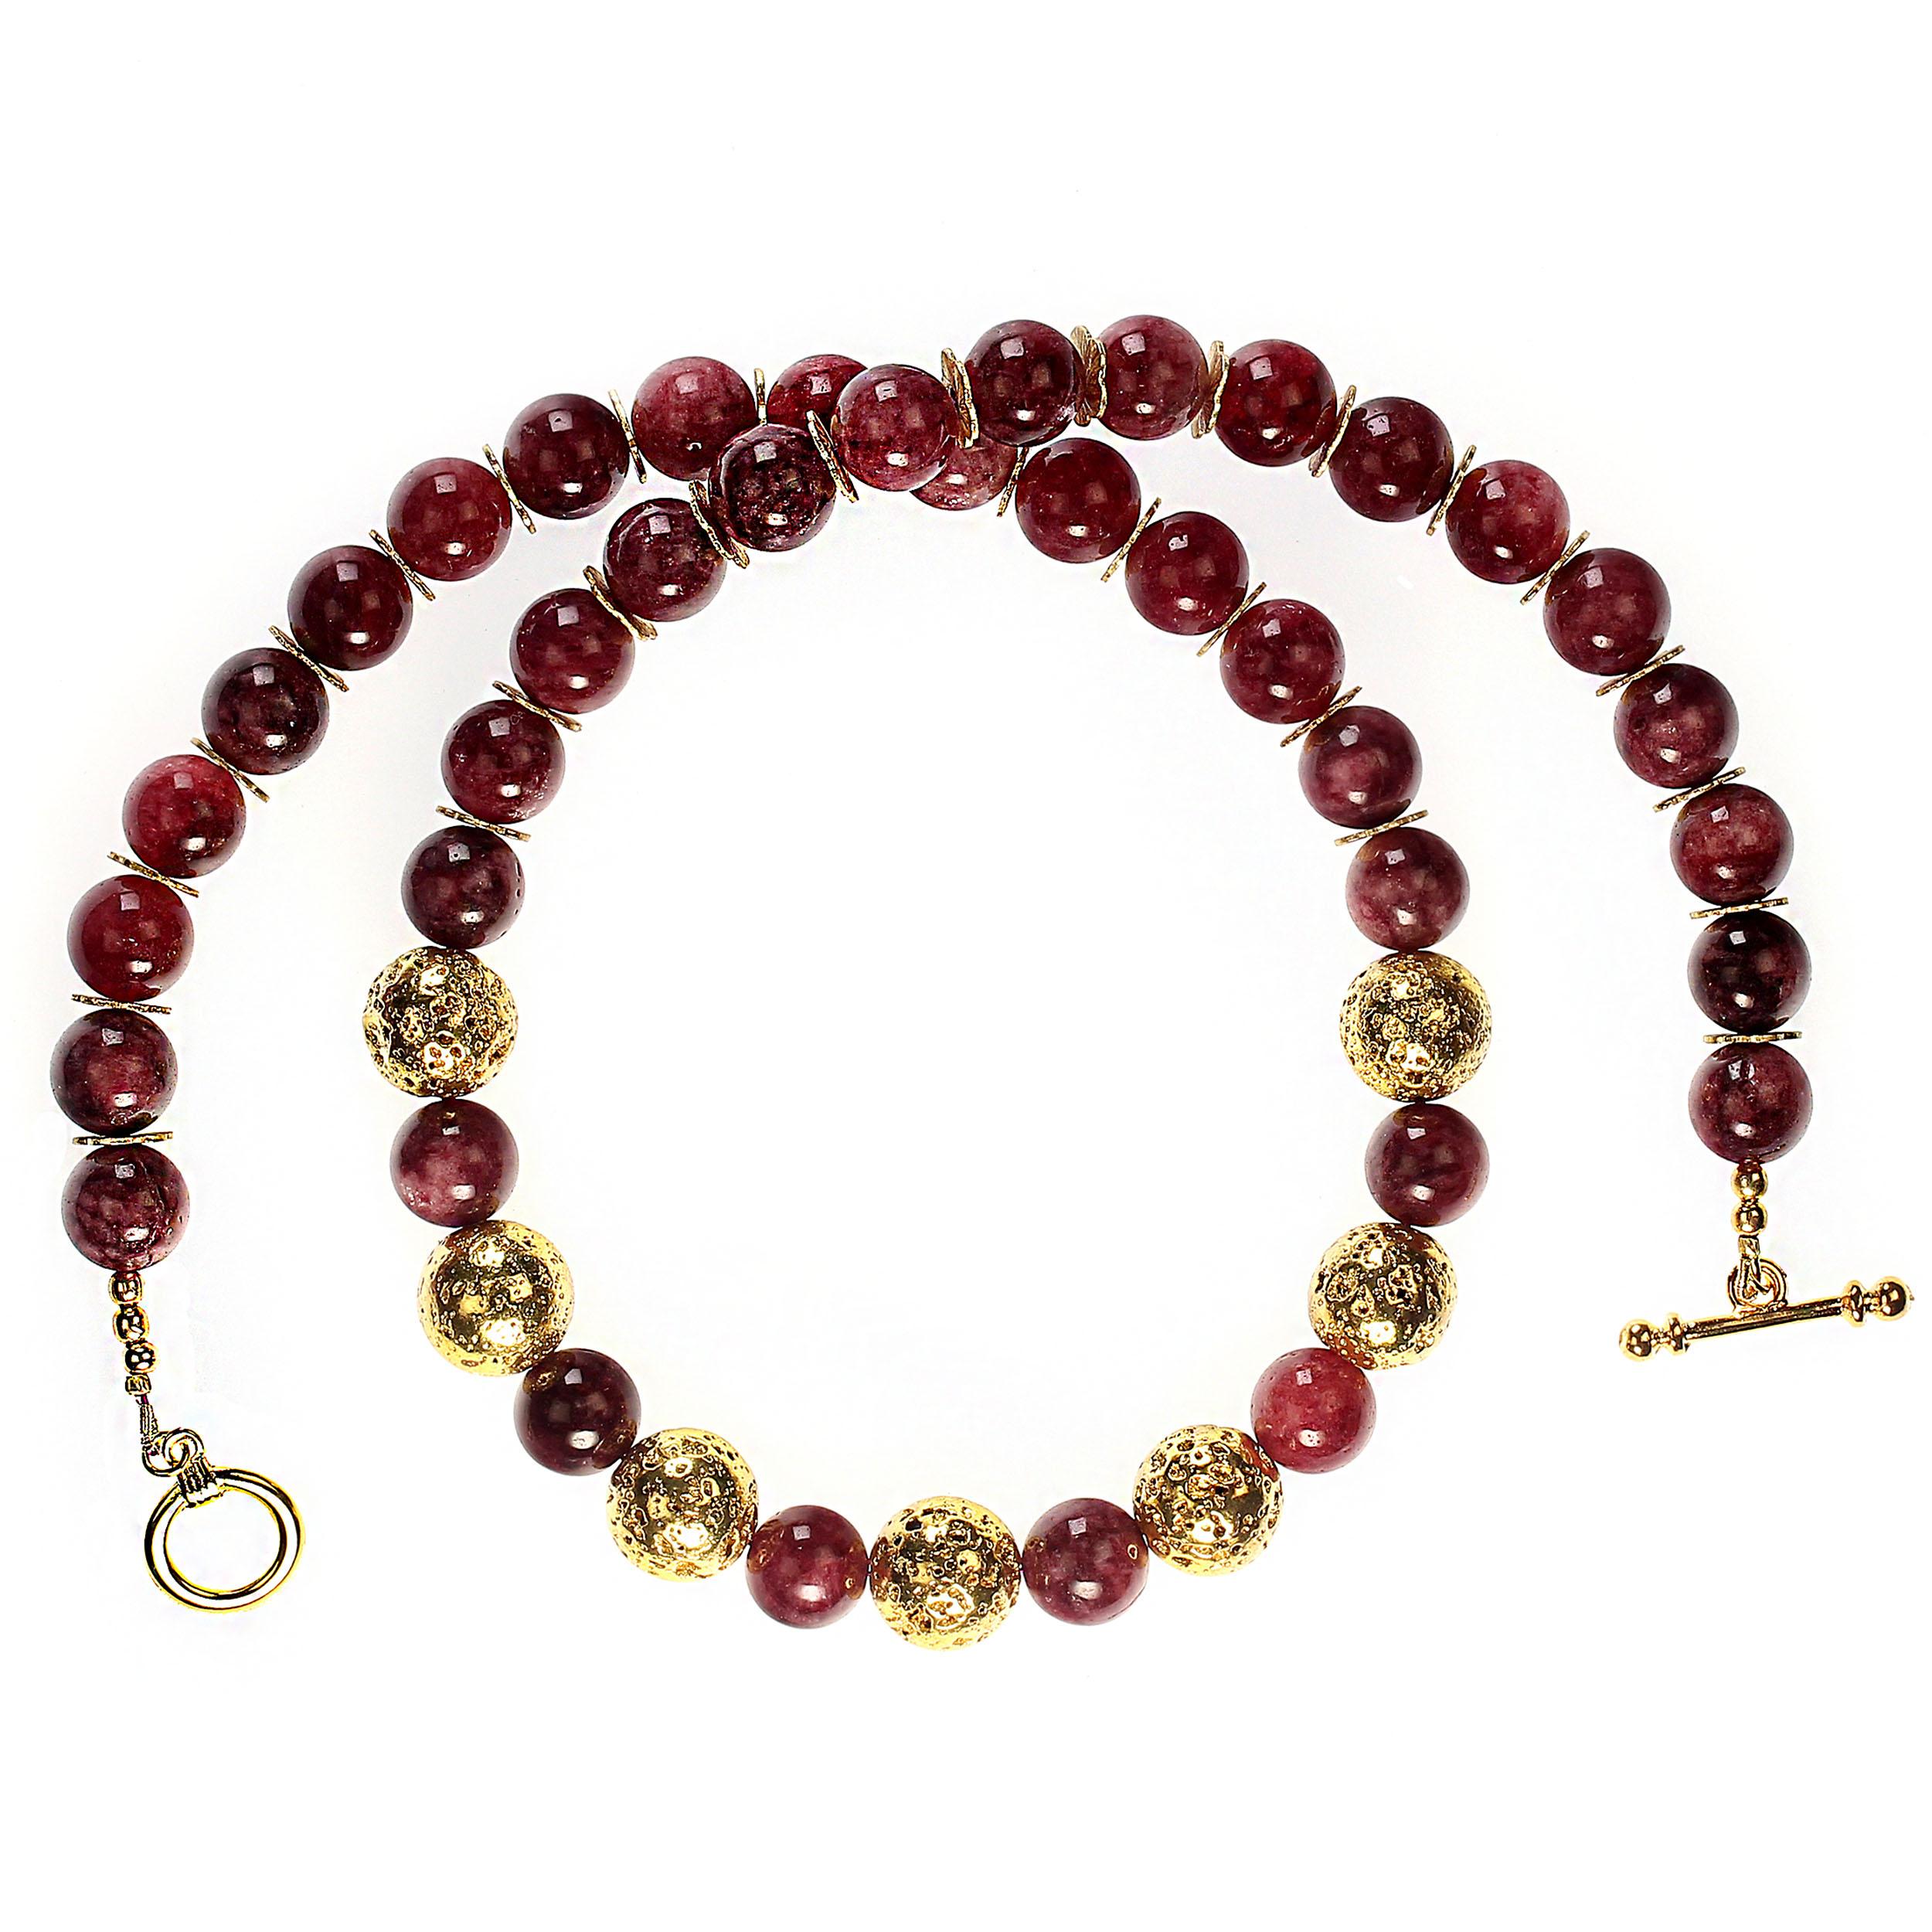 Bead AJD 21 Inch Gorgeous Garnet Necklace Perfect for the January Birthday! For Sale